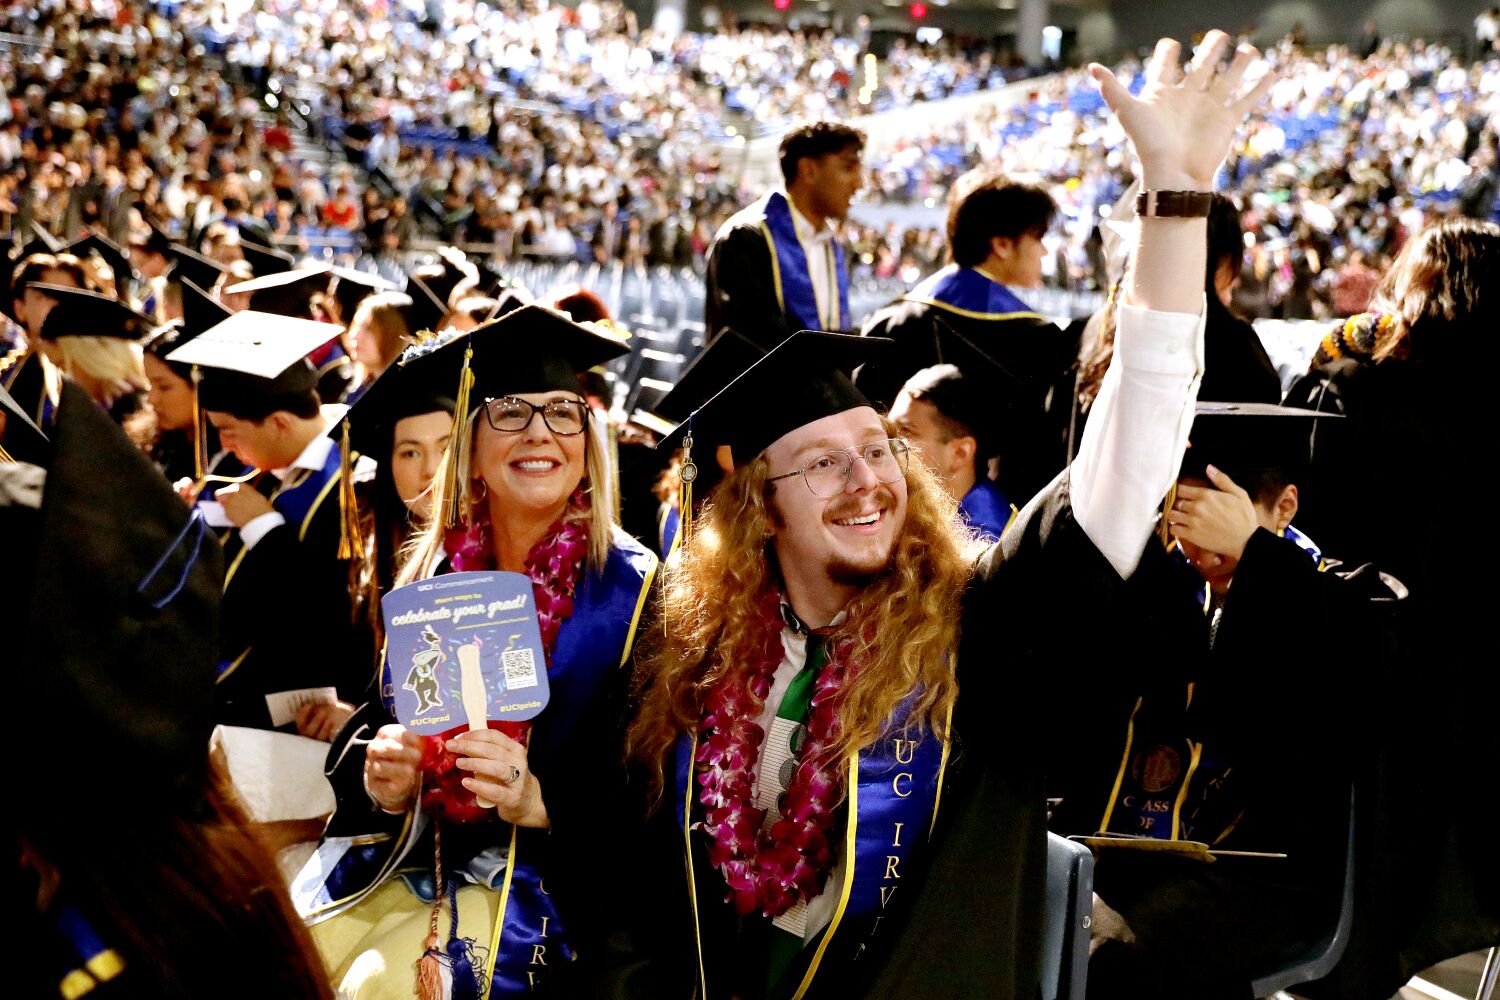 Grad-parent: Mother and son graduate from UC Irvine on same day